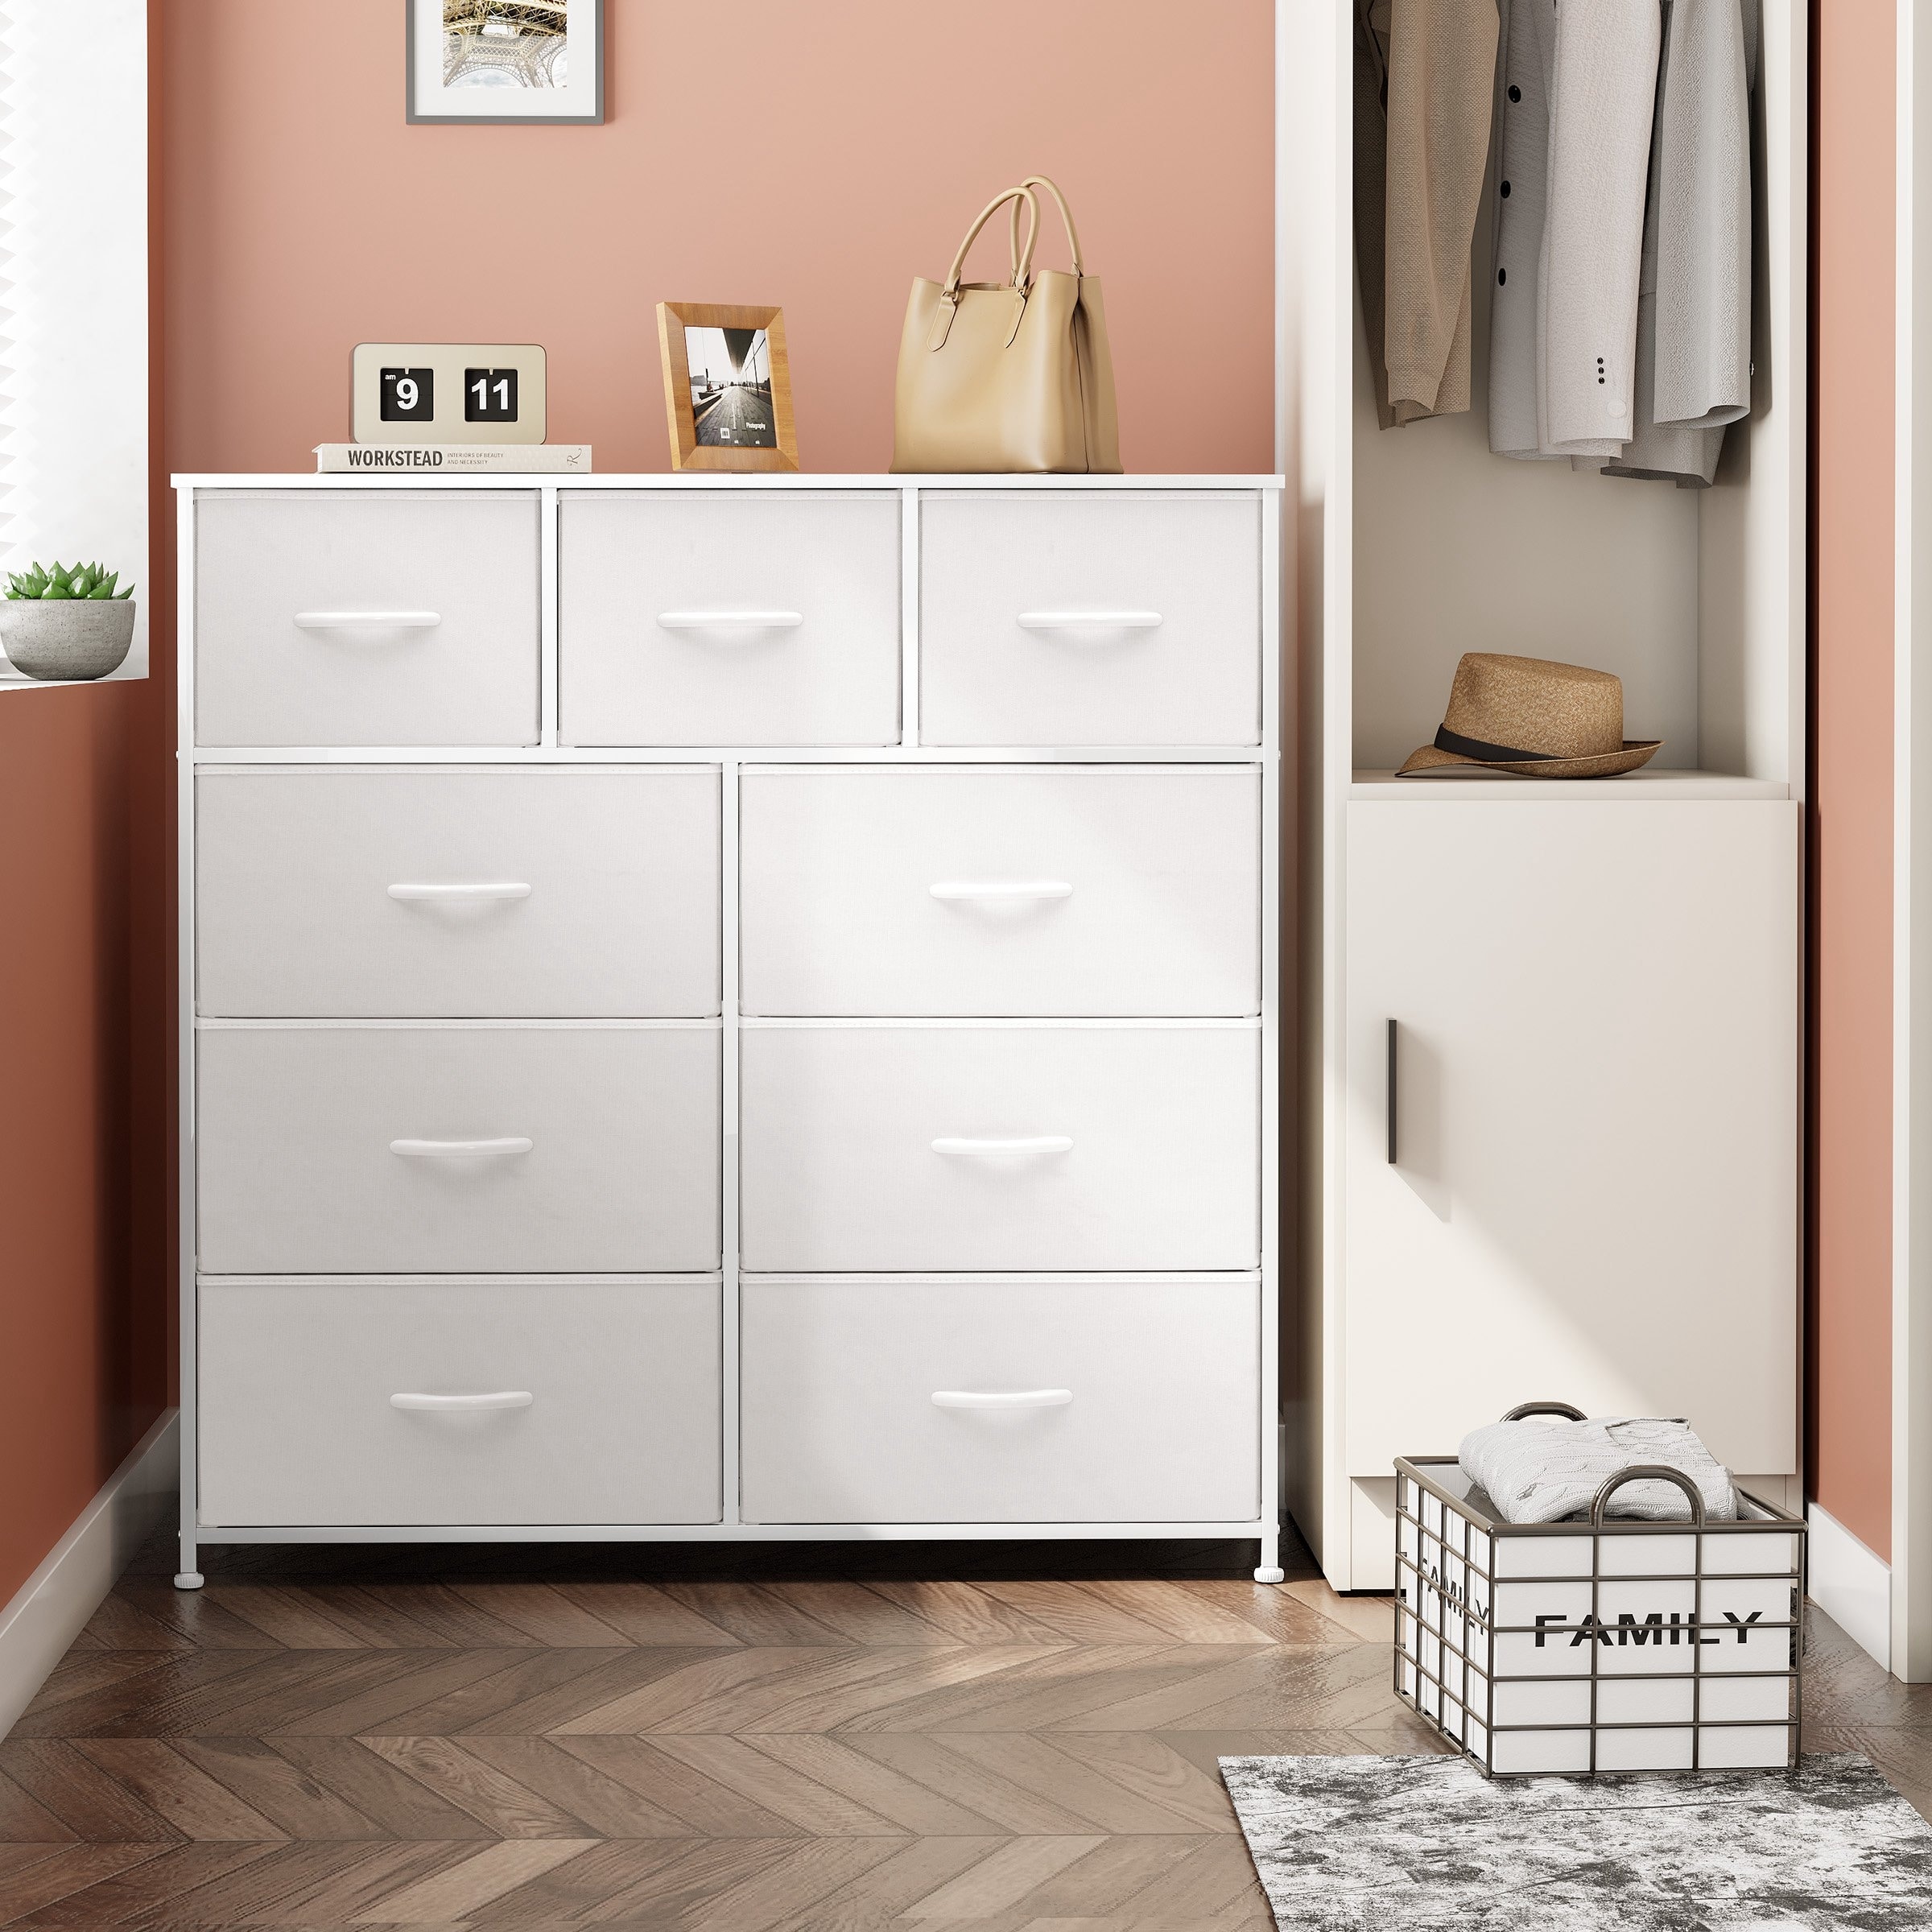 Trunk wardrobe - All architecture and design manufacturers